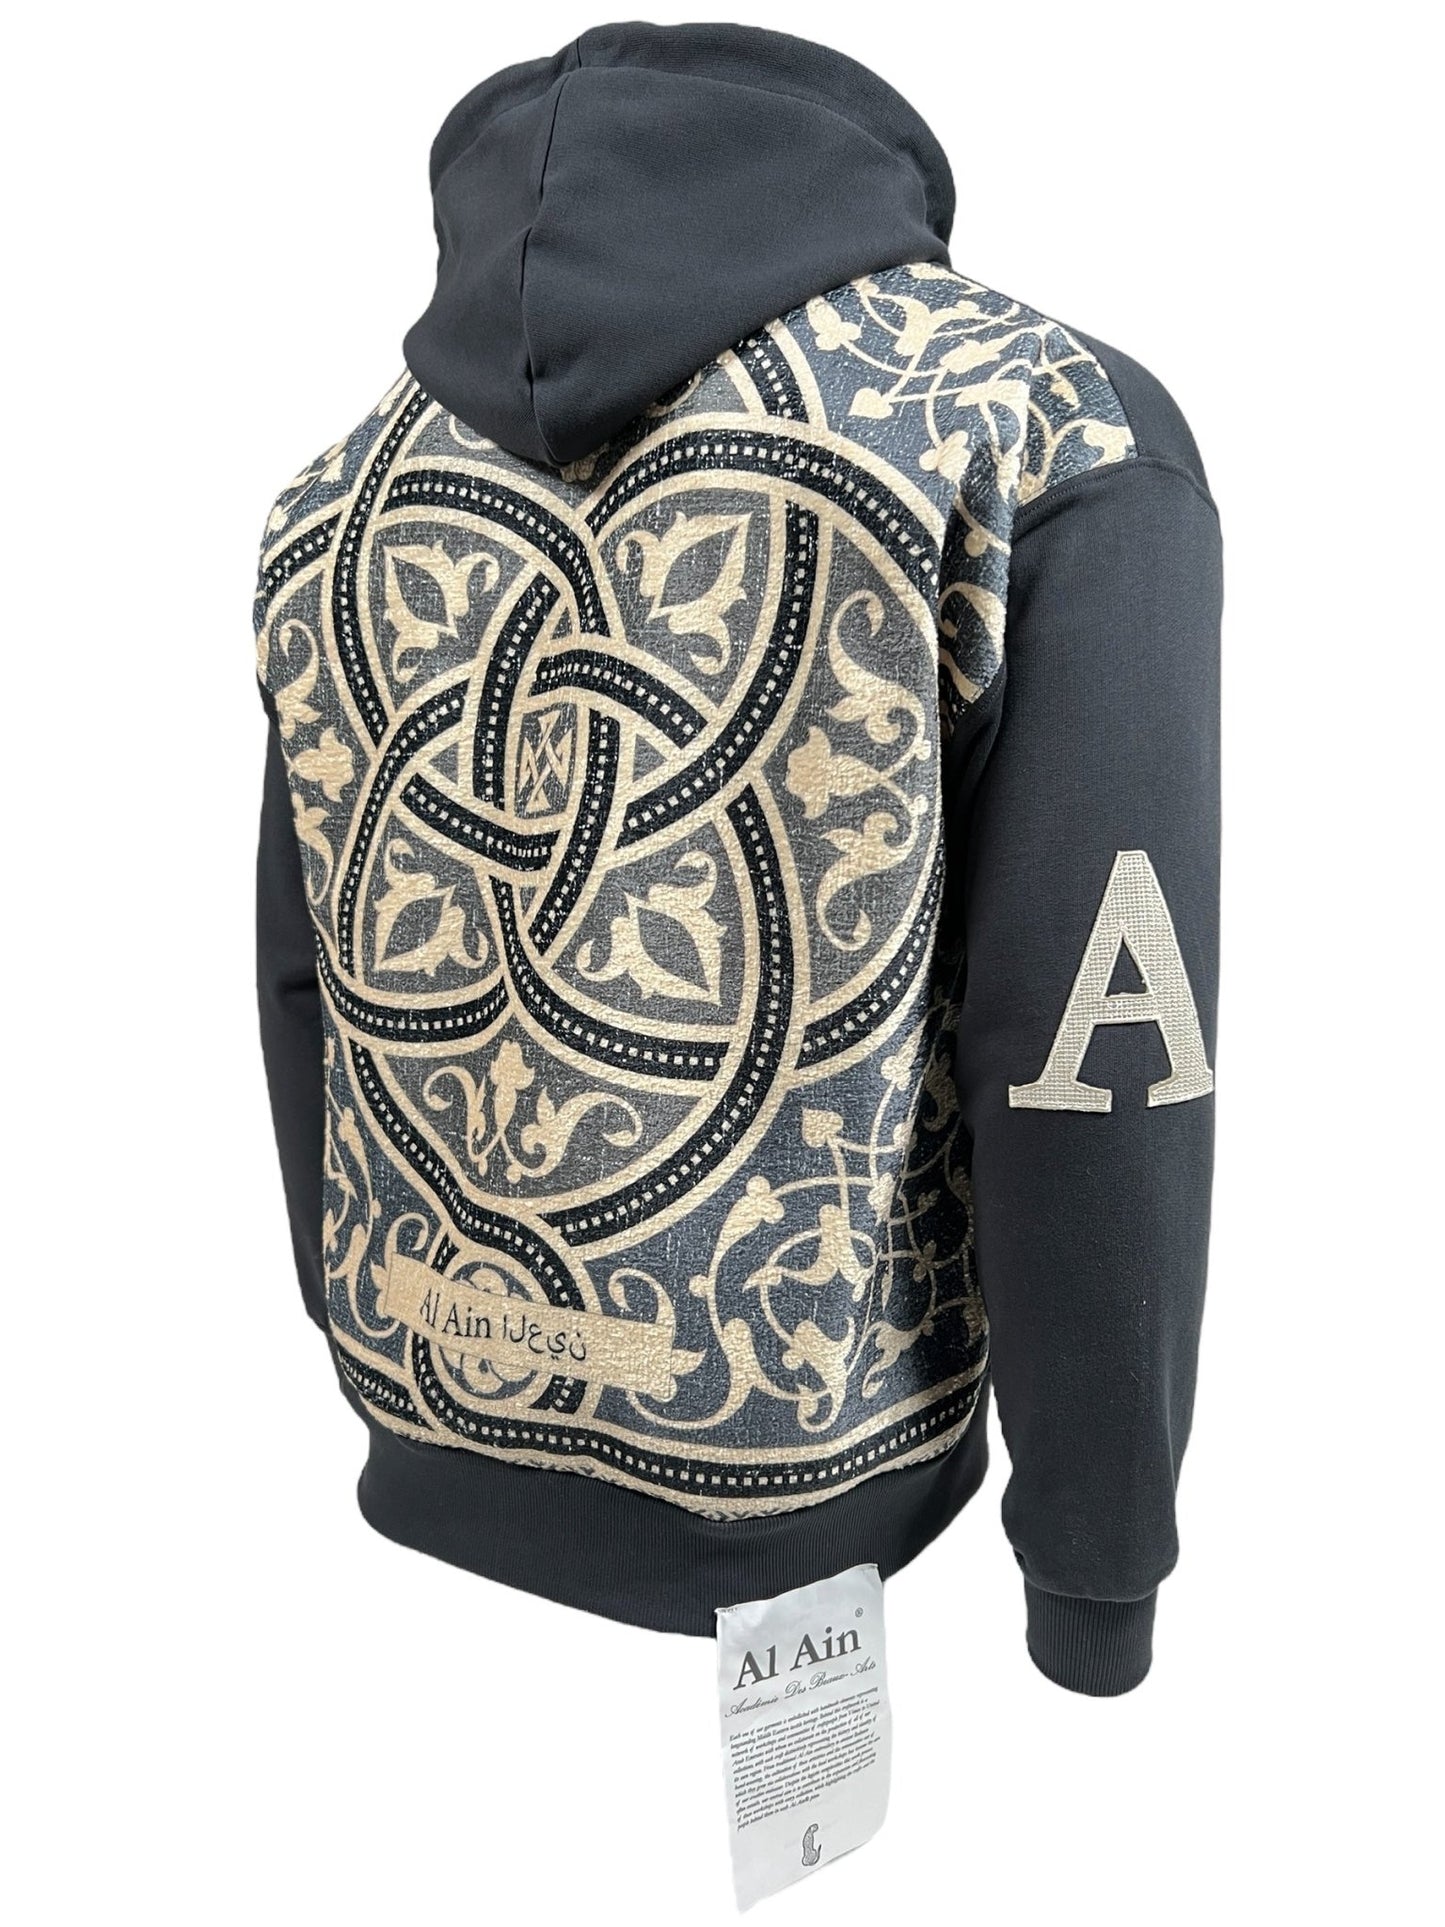 The AL AIN AHZX S103 SECRET NOIR hoodie, crafted from 100% cotton, showcases a black design with a complex beige and black pattern on the back. It features a large letter "A" on the left sleeve and a white label with text at the bottom, perfect for streetwear enthusiasts.